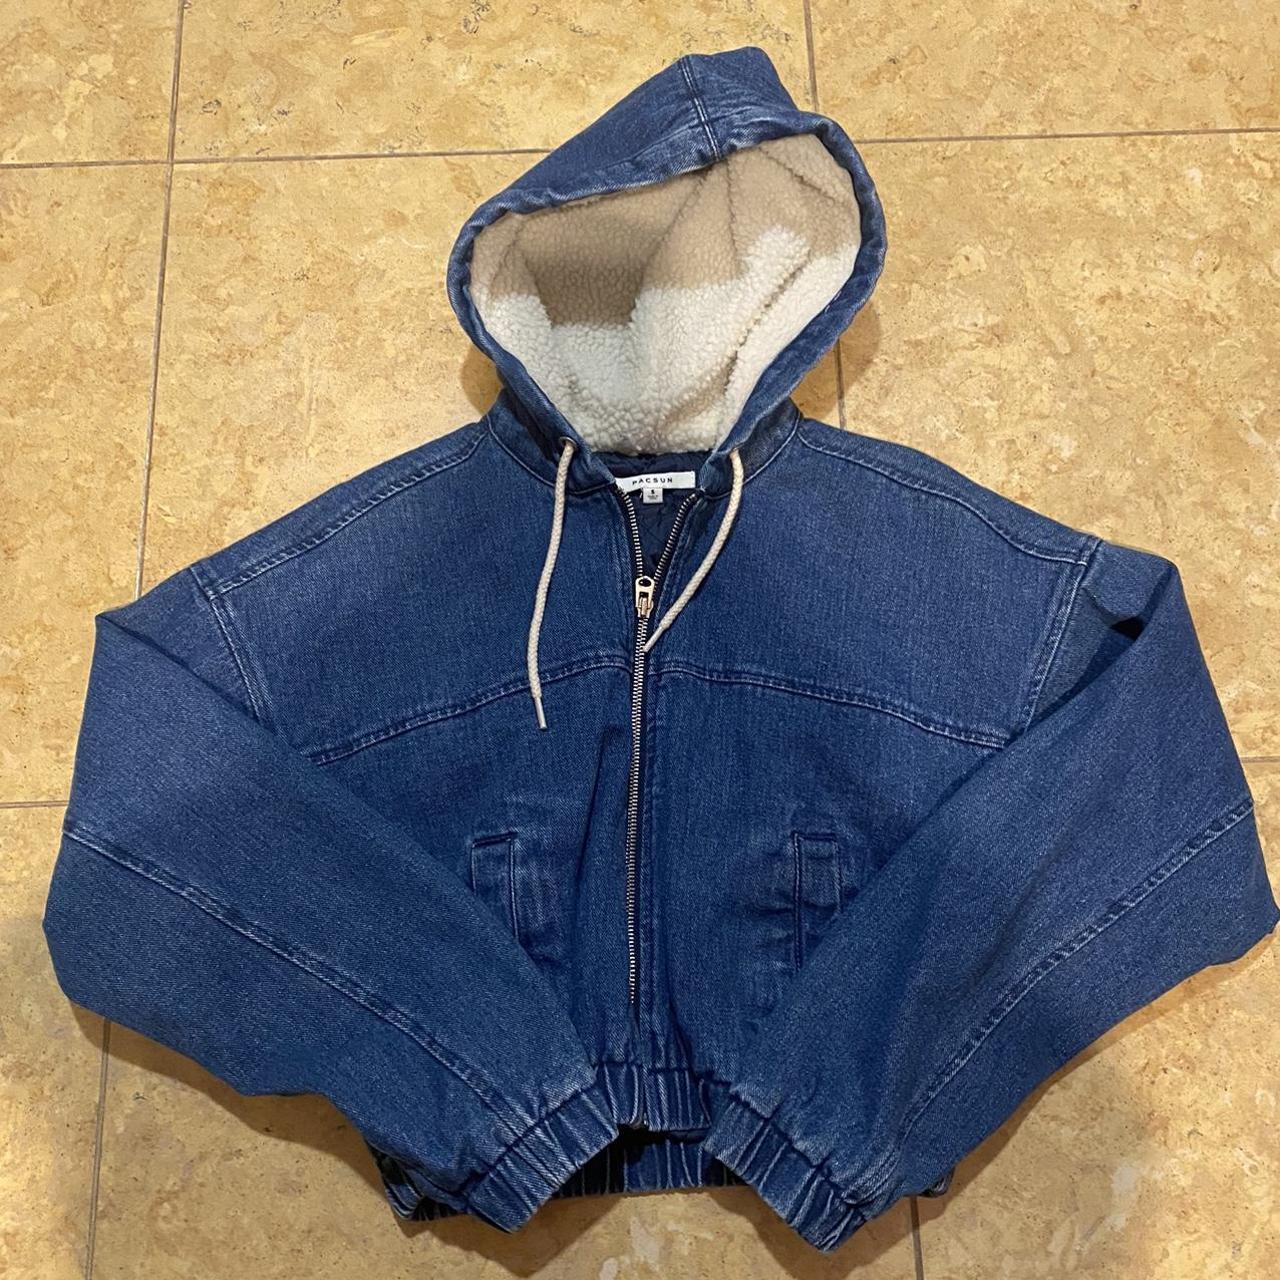 PacSun Women's Navy and Blue Jacket